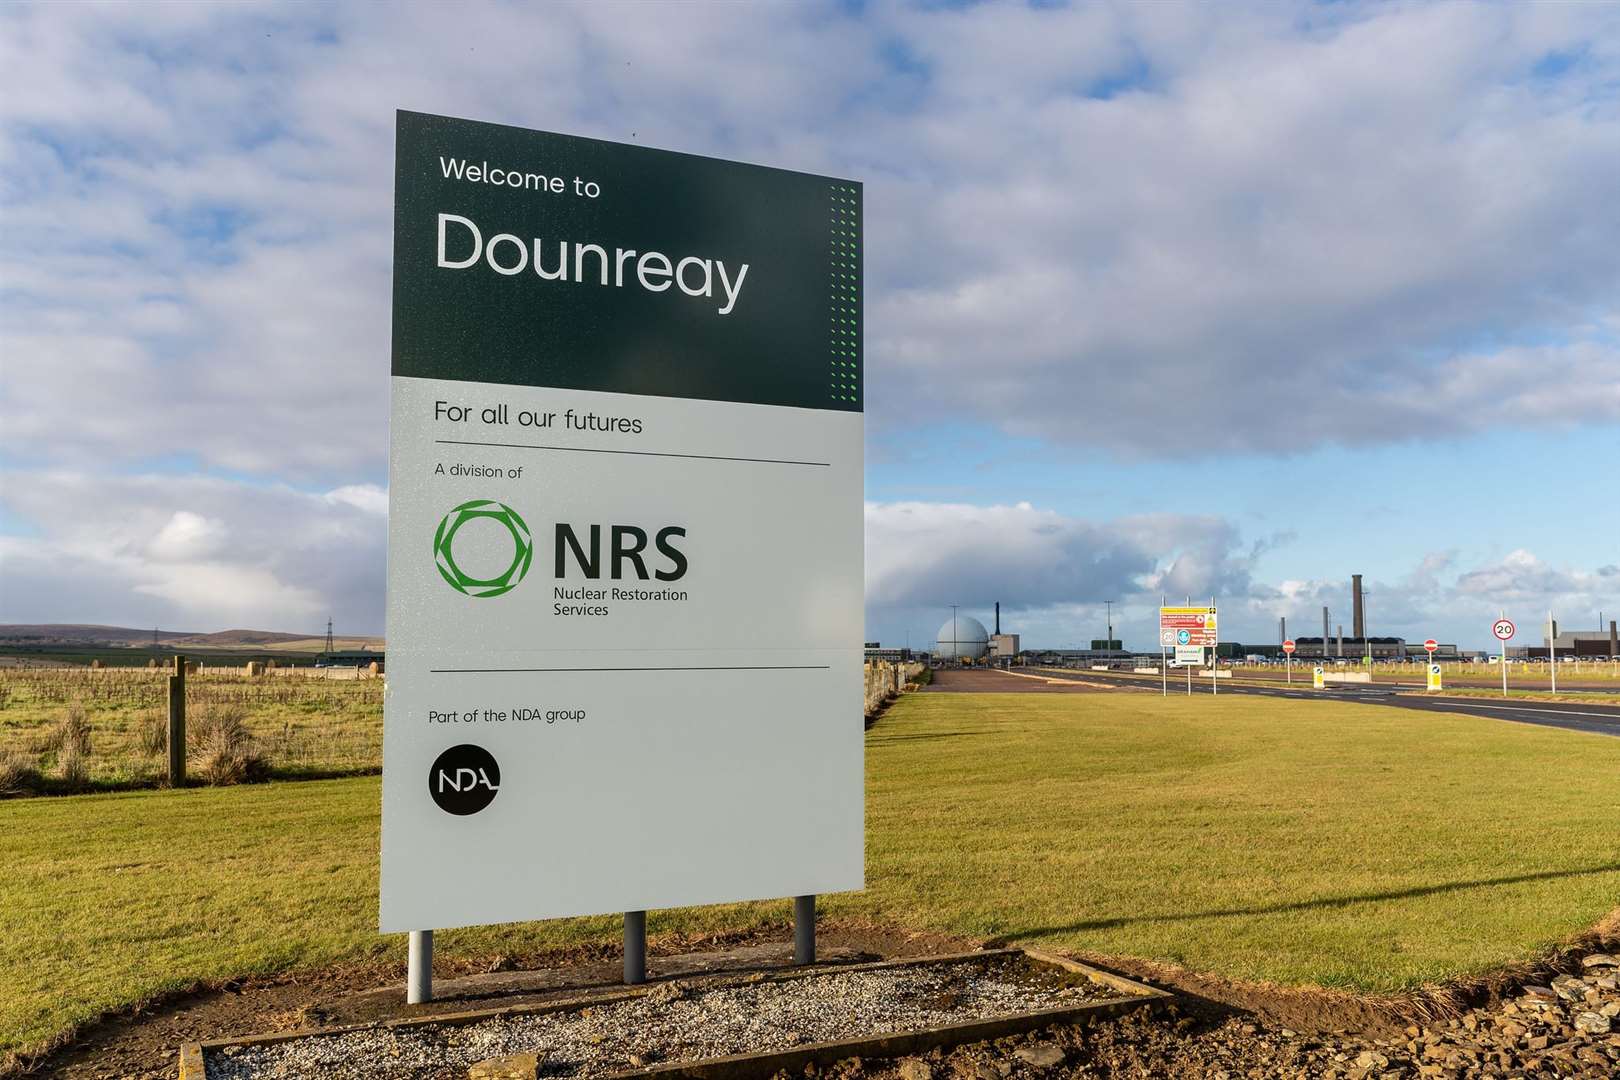 Dounreay's new signpost reflecting the NRS branding.